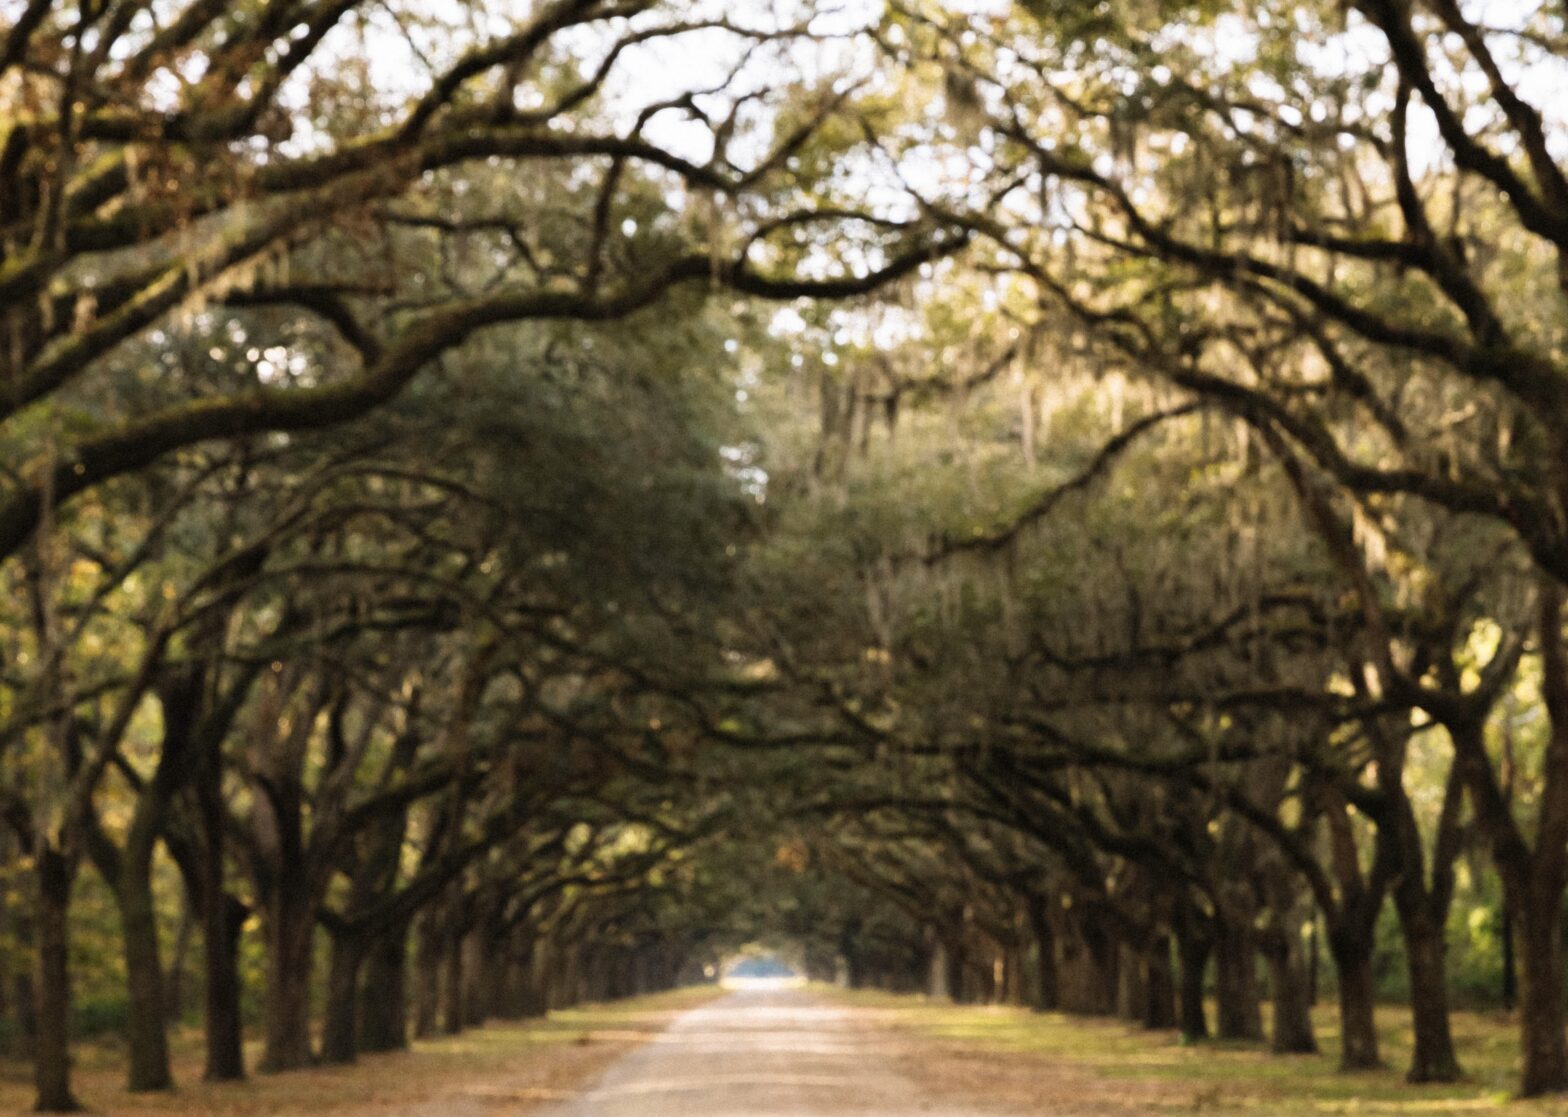 There are plenty of destinations to help determine where to stay in Savannah, Ga. Pictured: one of the beautiful roads leading into Savannah. This one has trees overarching above.